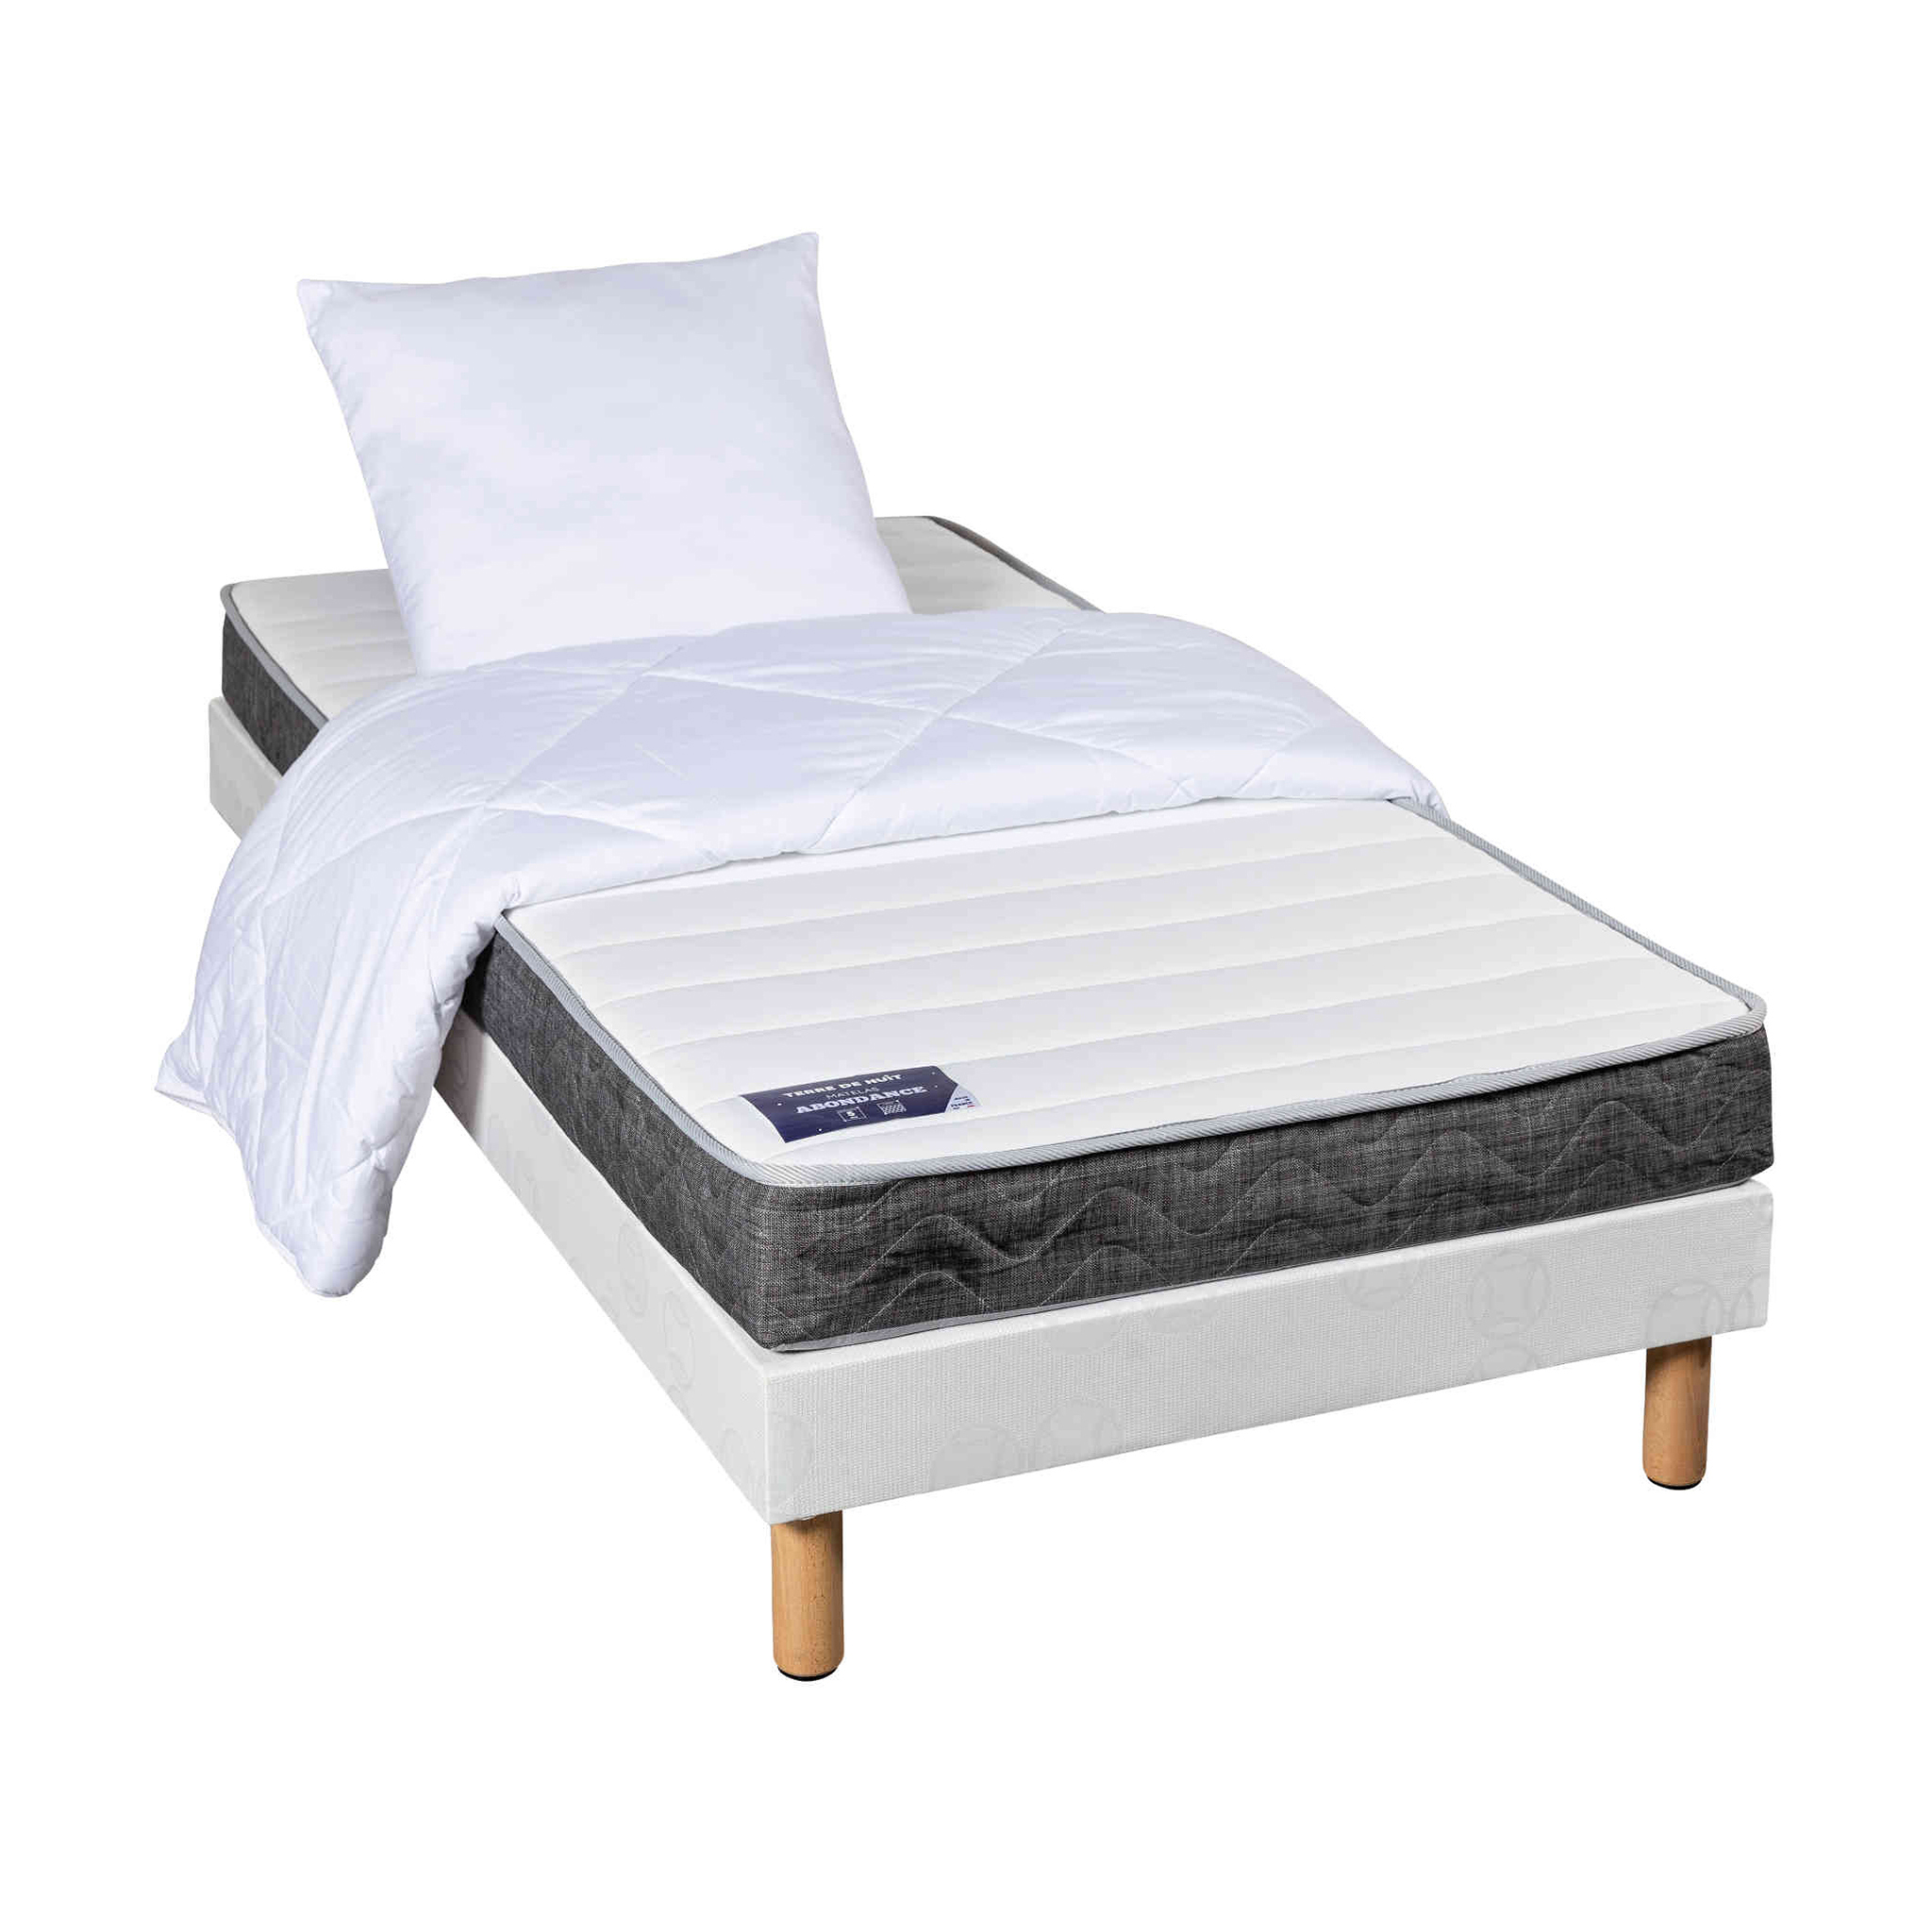 Matelas Douces Nuits Laly 100% Latex 90x200